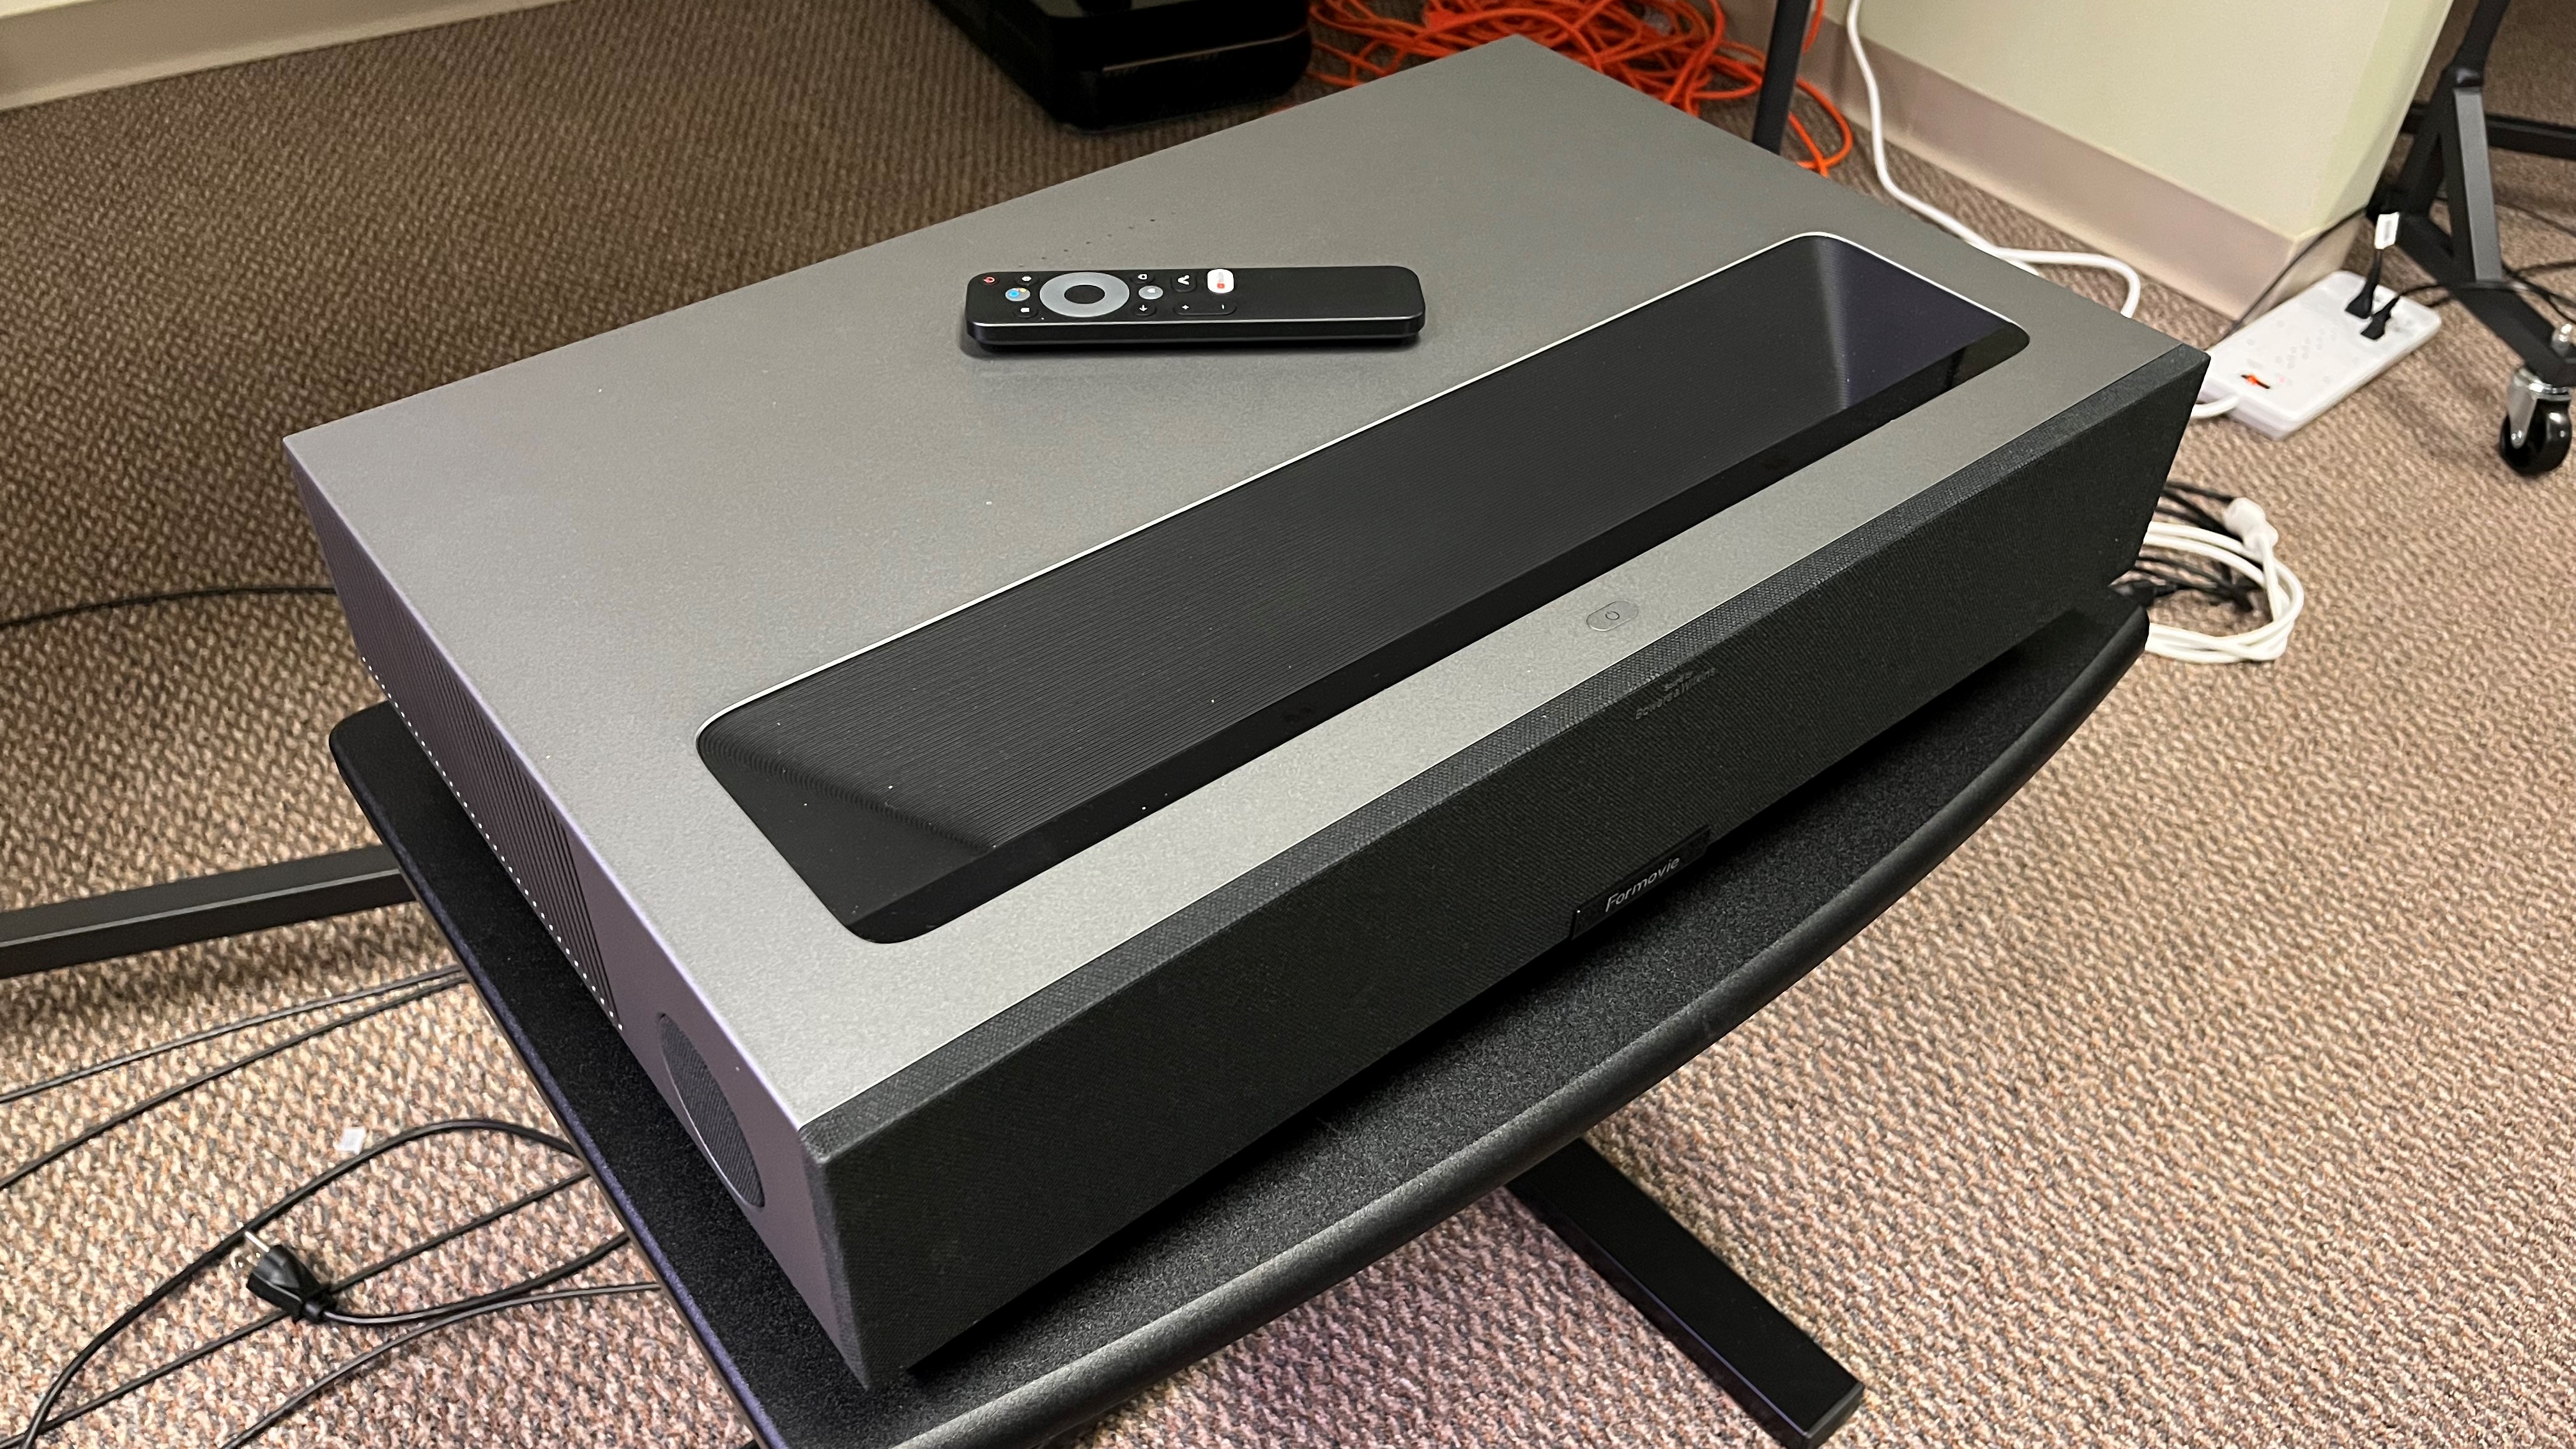 Formovie Theater laser projector angled with remote control on top surface